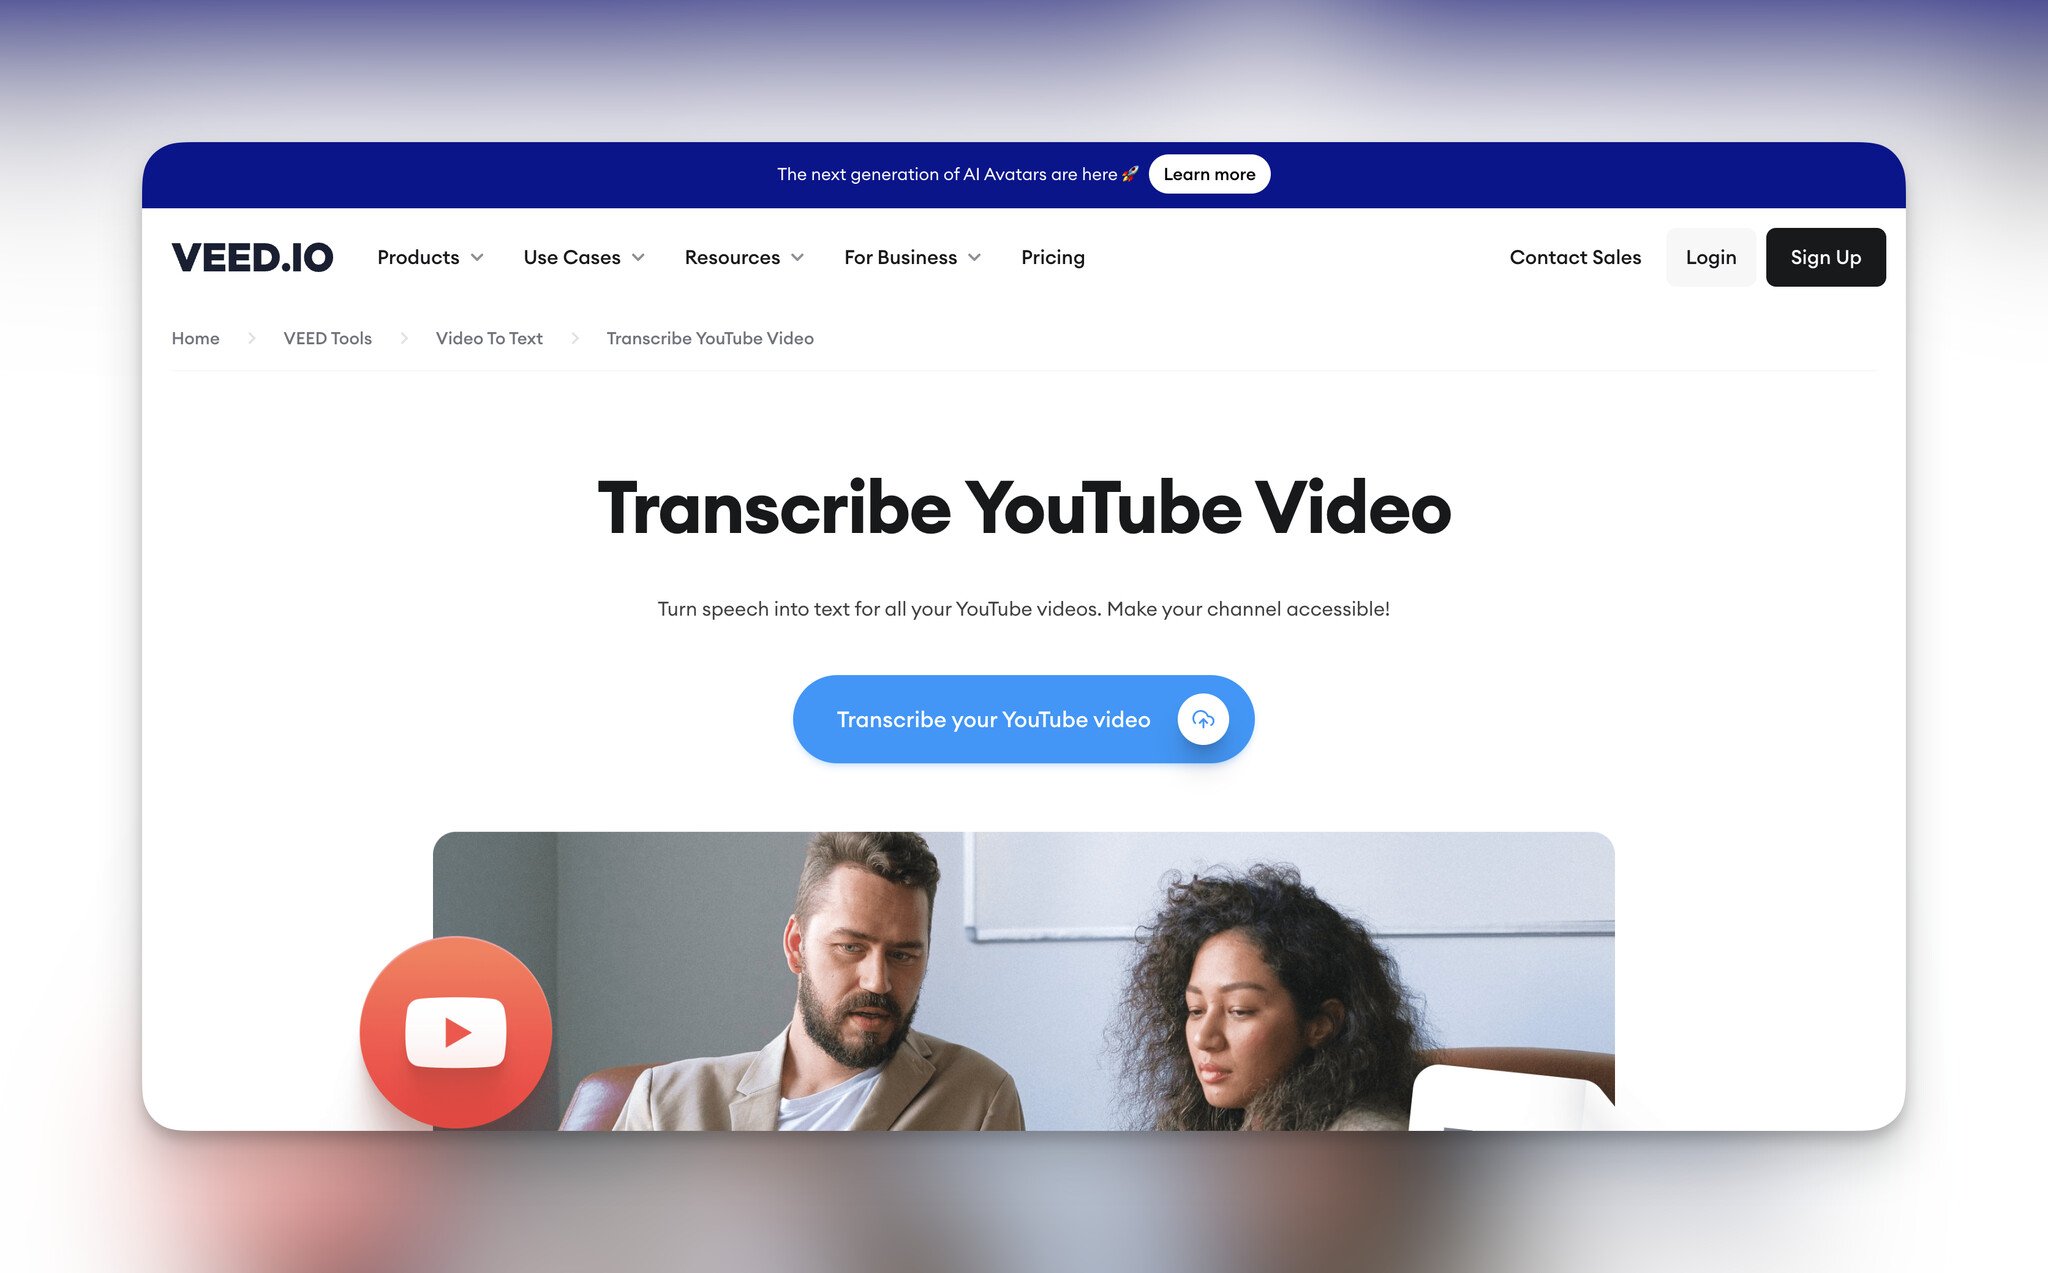 Veed.io's YouTube video transcription landing page with the headline "Transcribe YouTube Video" in the center followed by a blue "Transcribe your YouTube video button and the image of a female and a male below